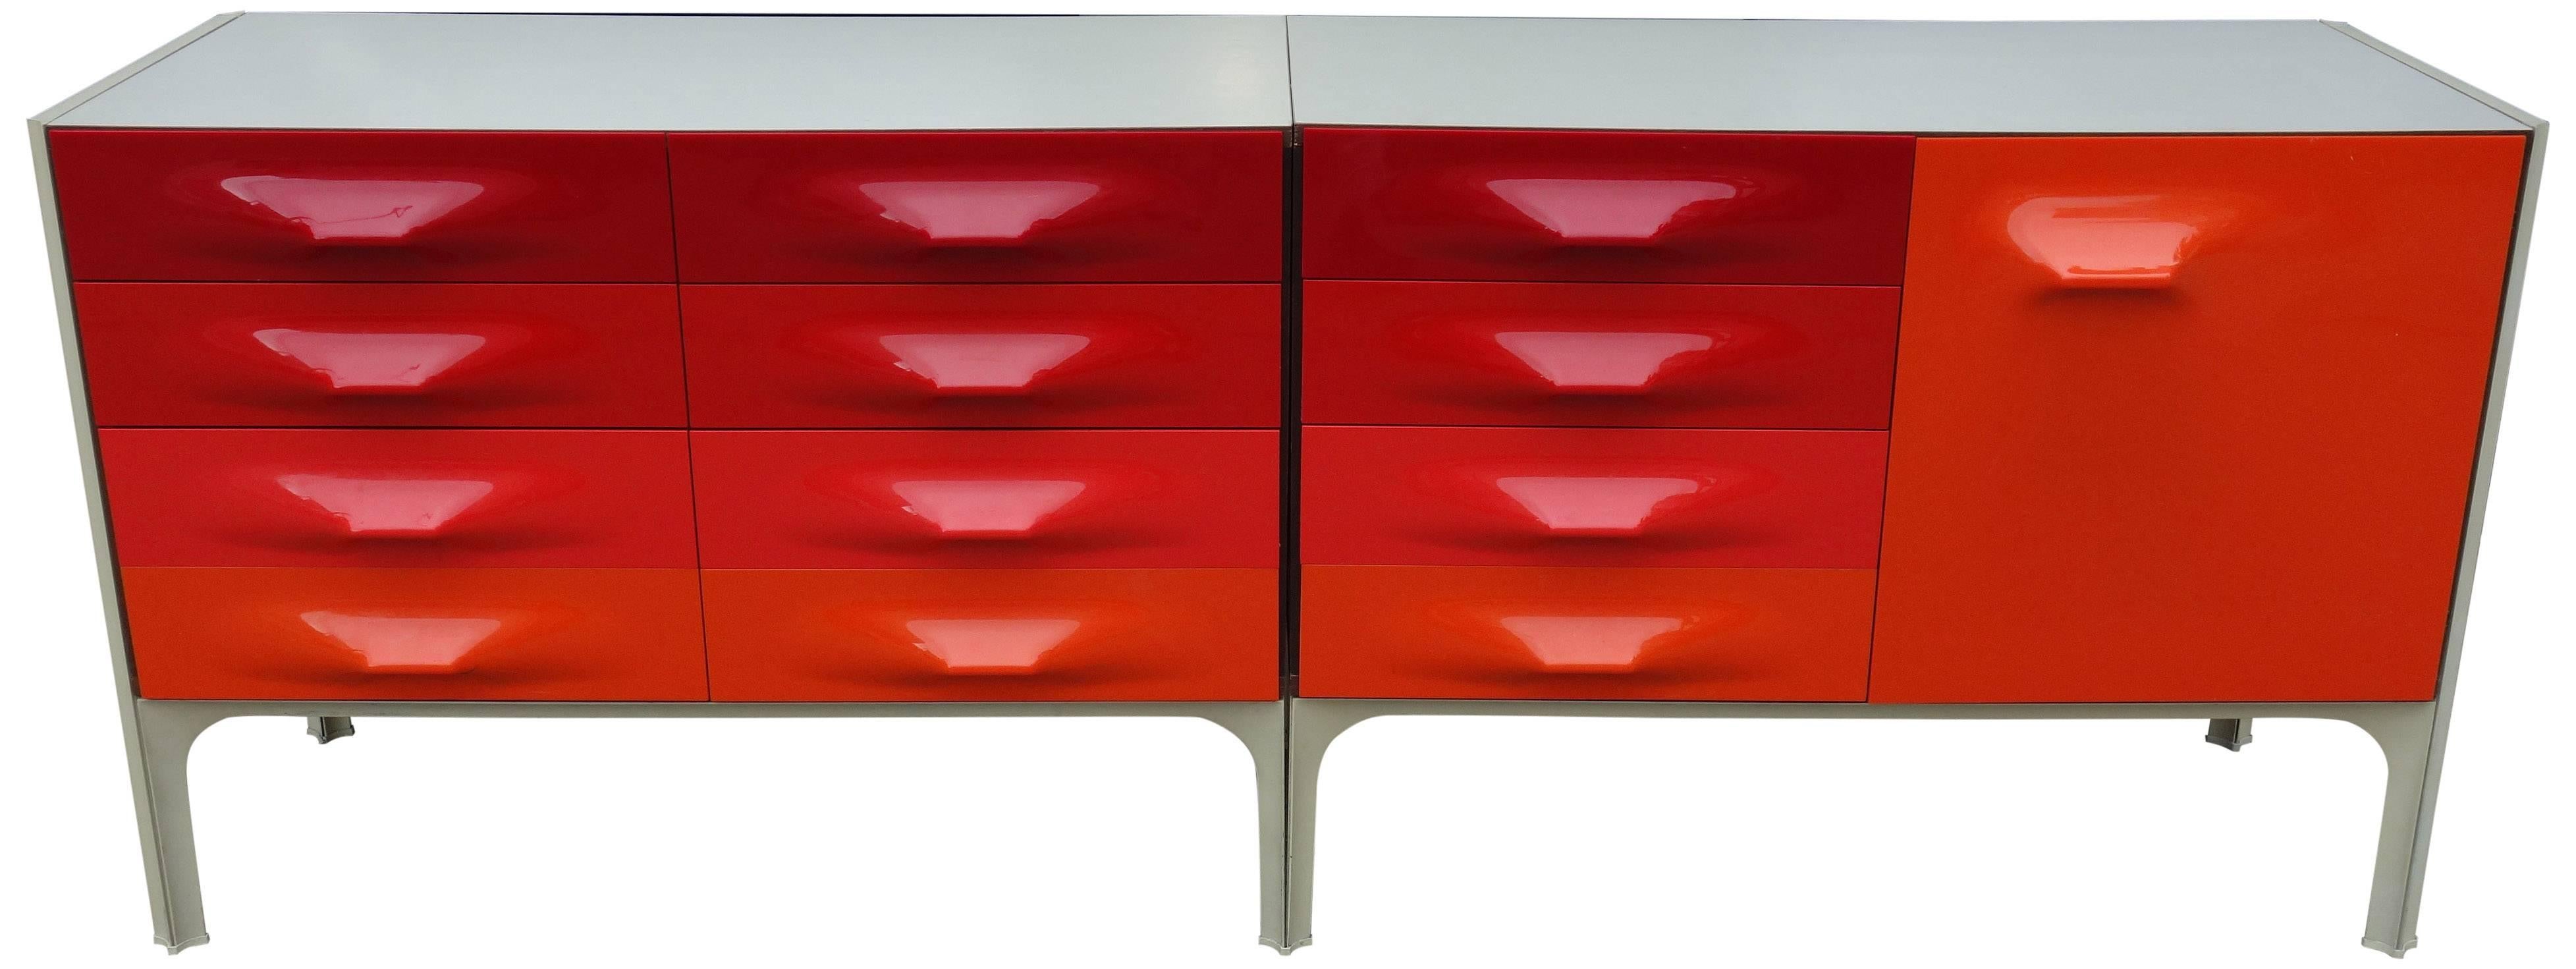 French Mid-Century Raymond Loewy DF-2000 Cabinet